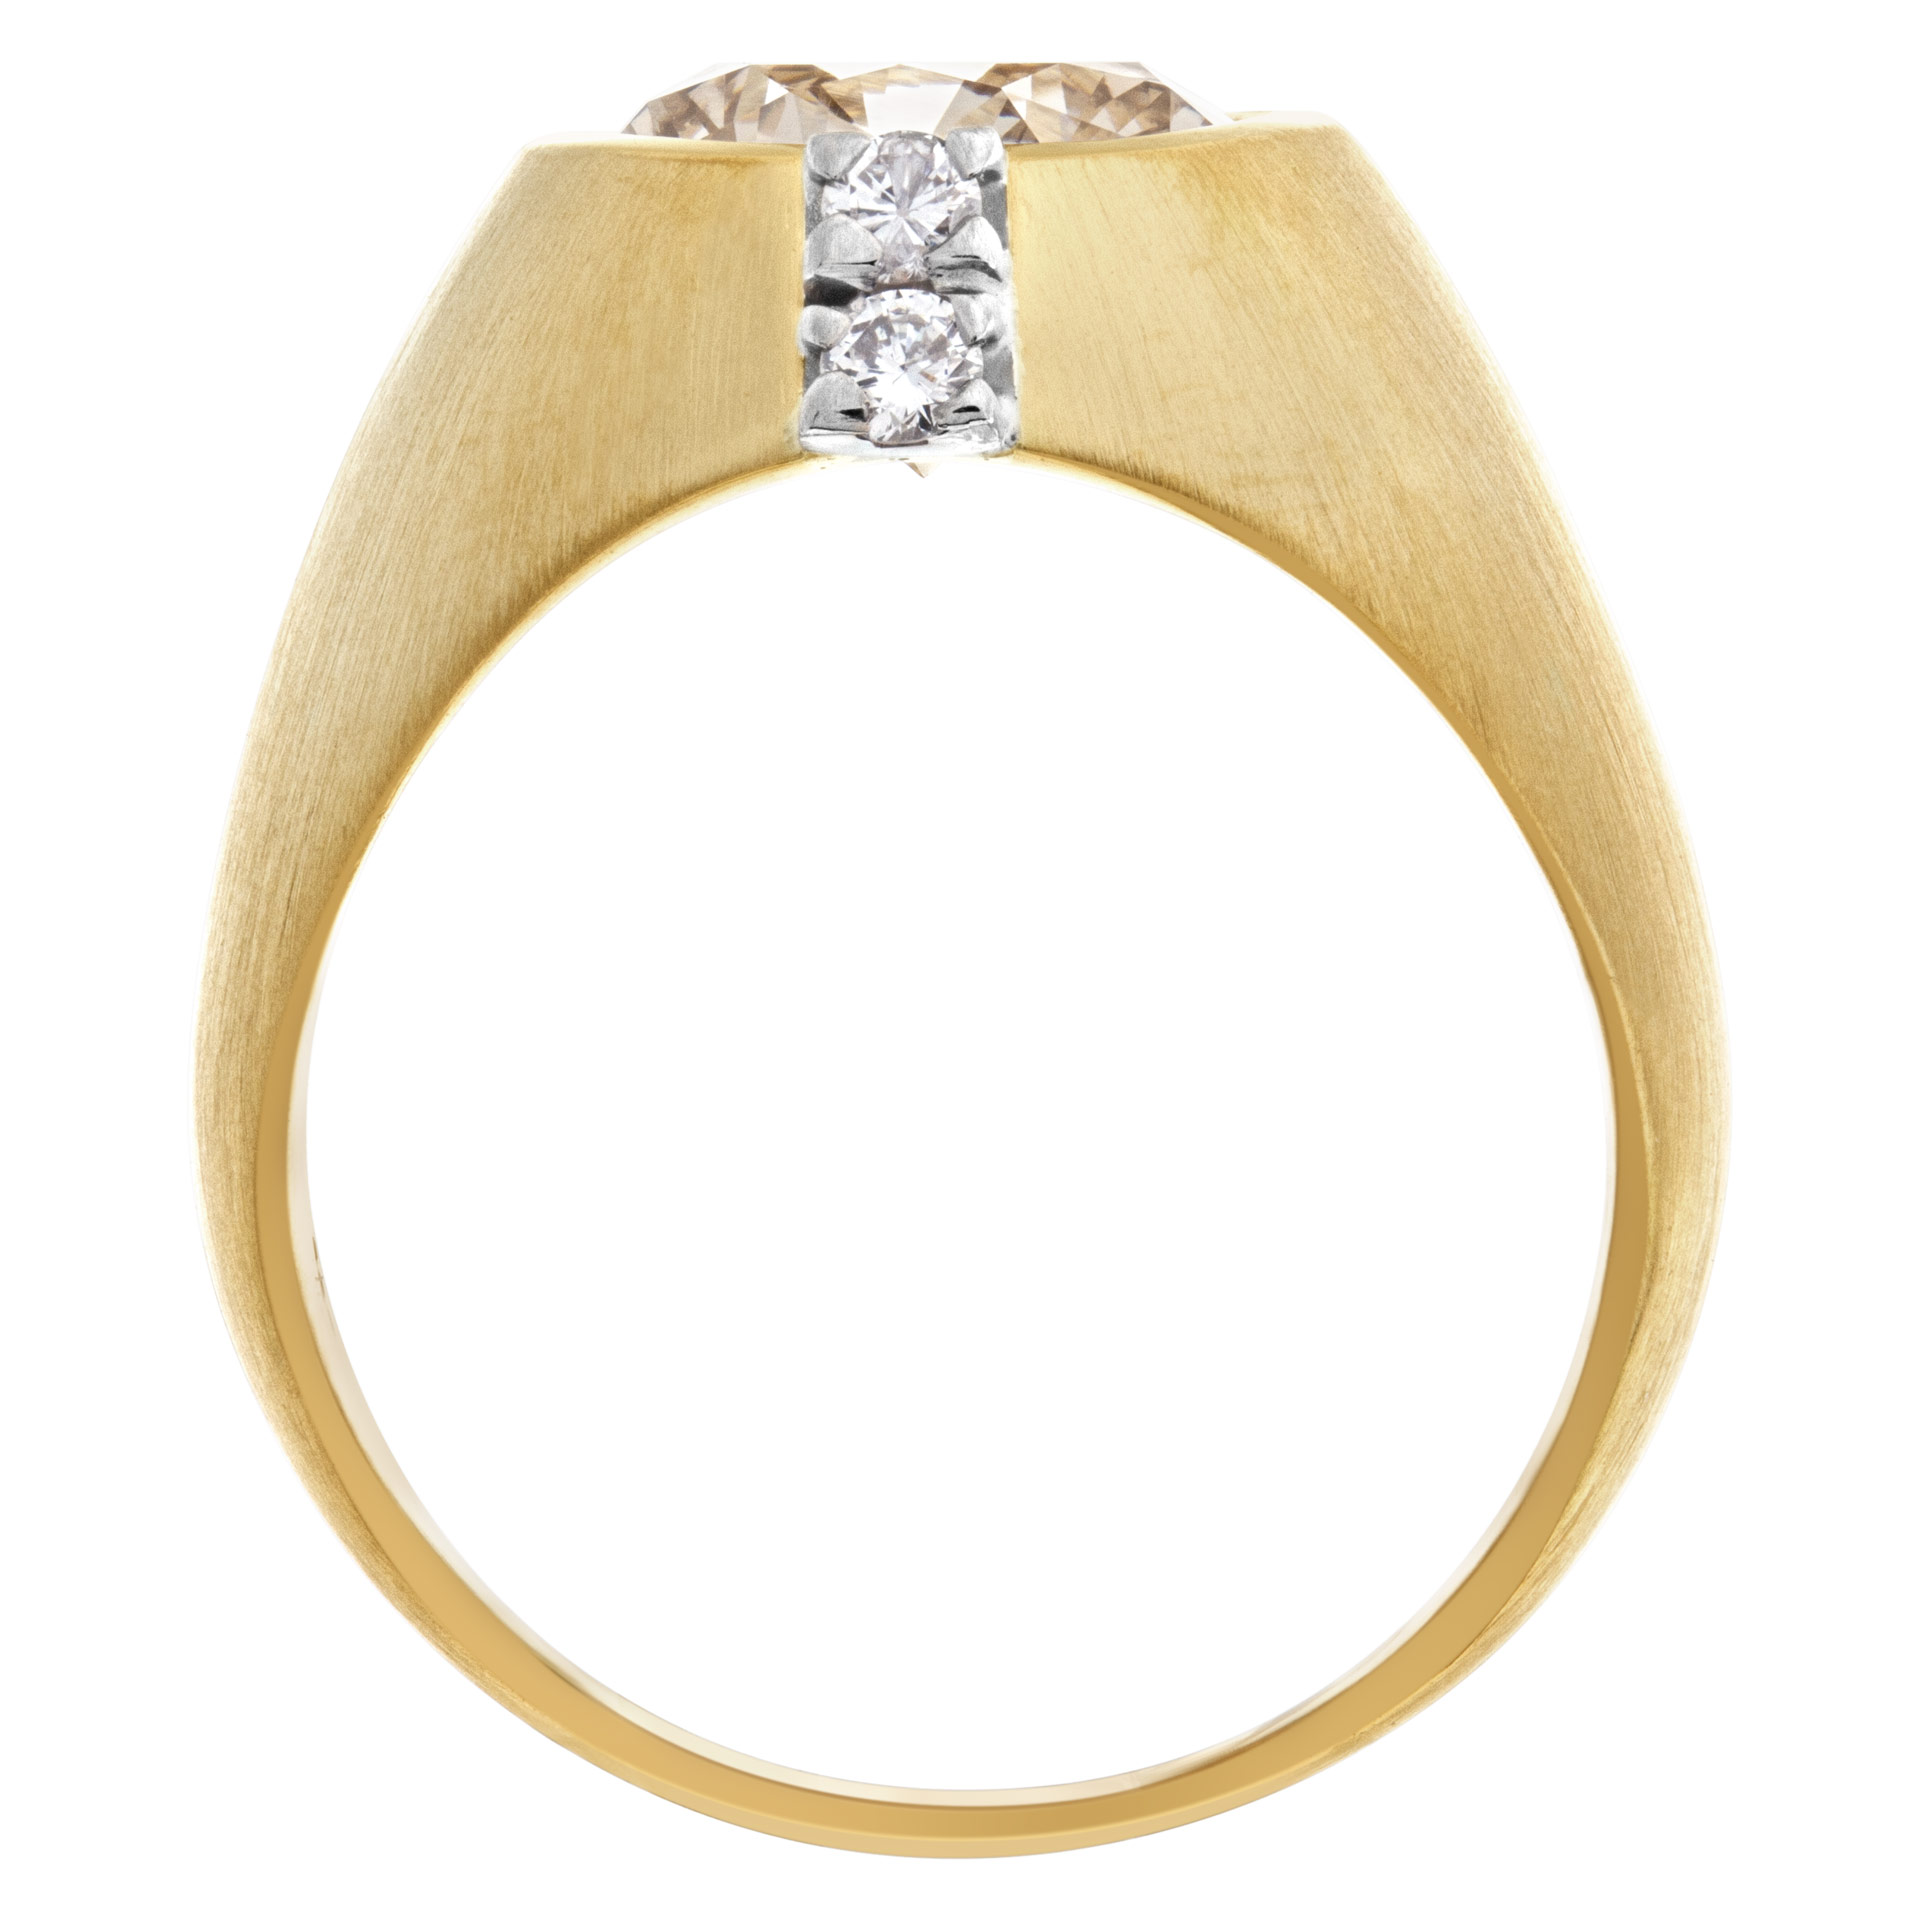 GIA Certified Kutchinsky diamond ring in 18k yellow gold. Warm and bright 4.23 carat center diamond champgane color, VS1 clarity image 5